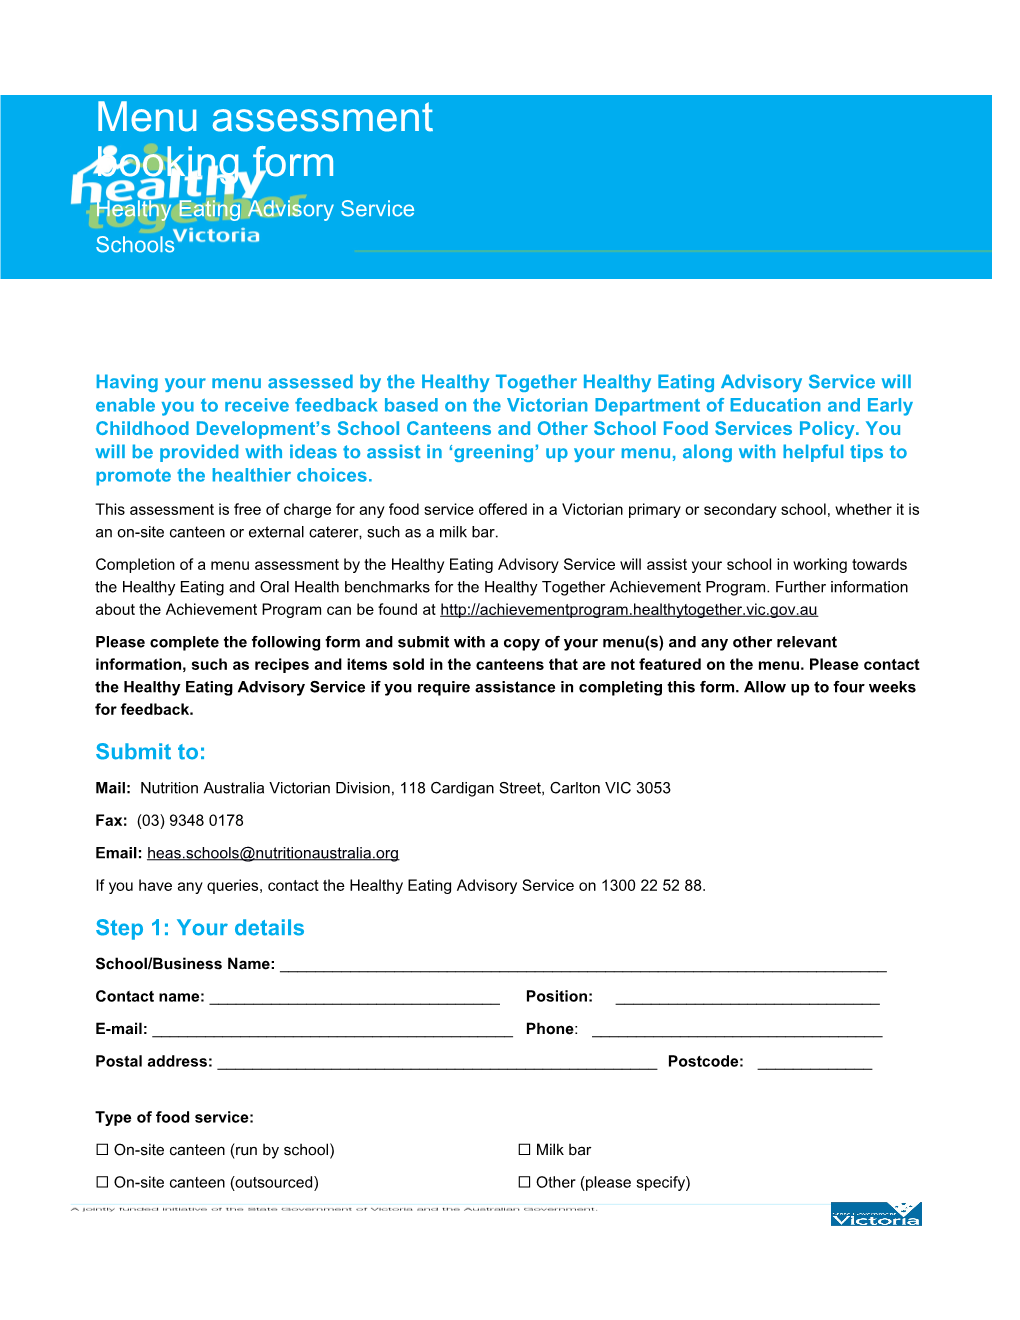 Having Your Menu Assessed by the Healthy Together Healthy Eating Advisory Service Will